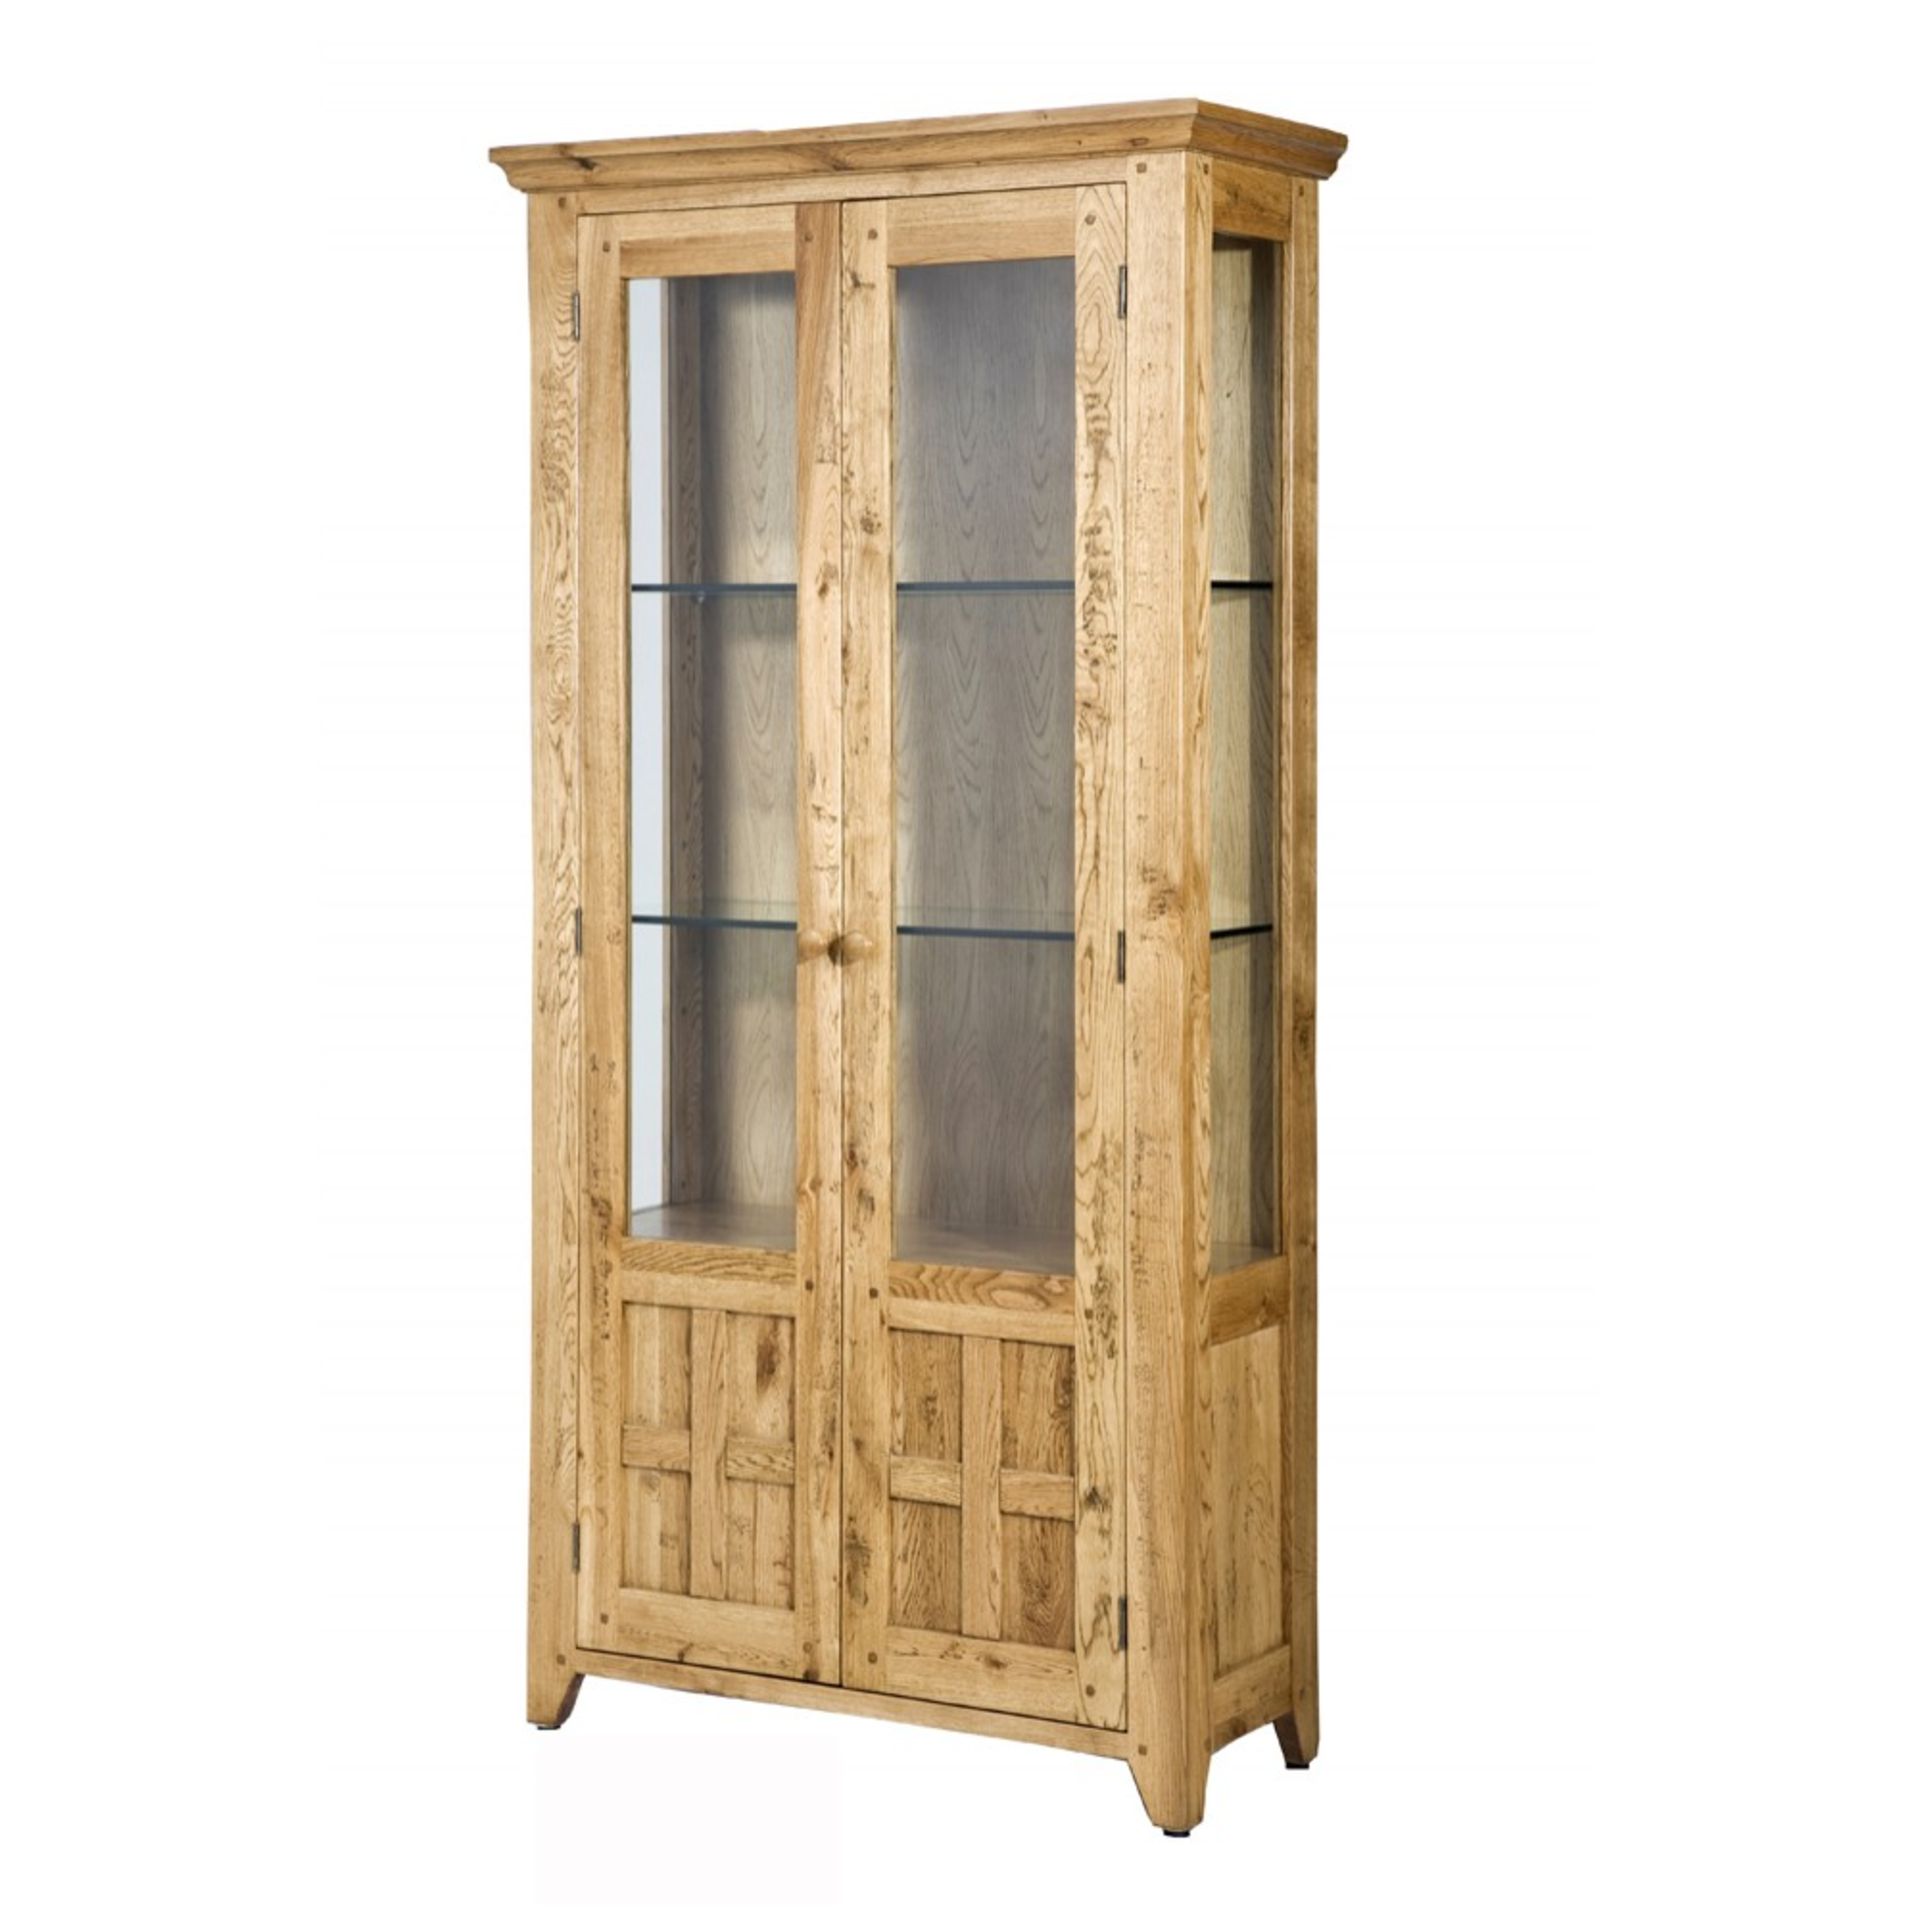 Halo Wentworth Display Cabinet A traditional collection featuring classic shapes and styles -